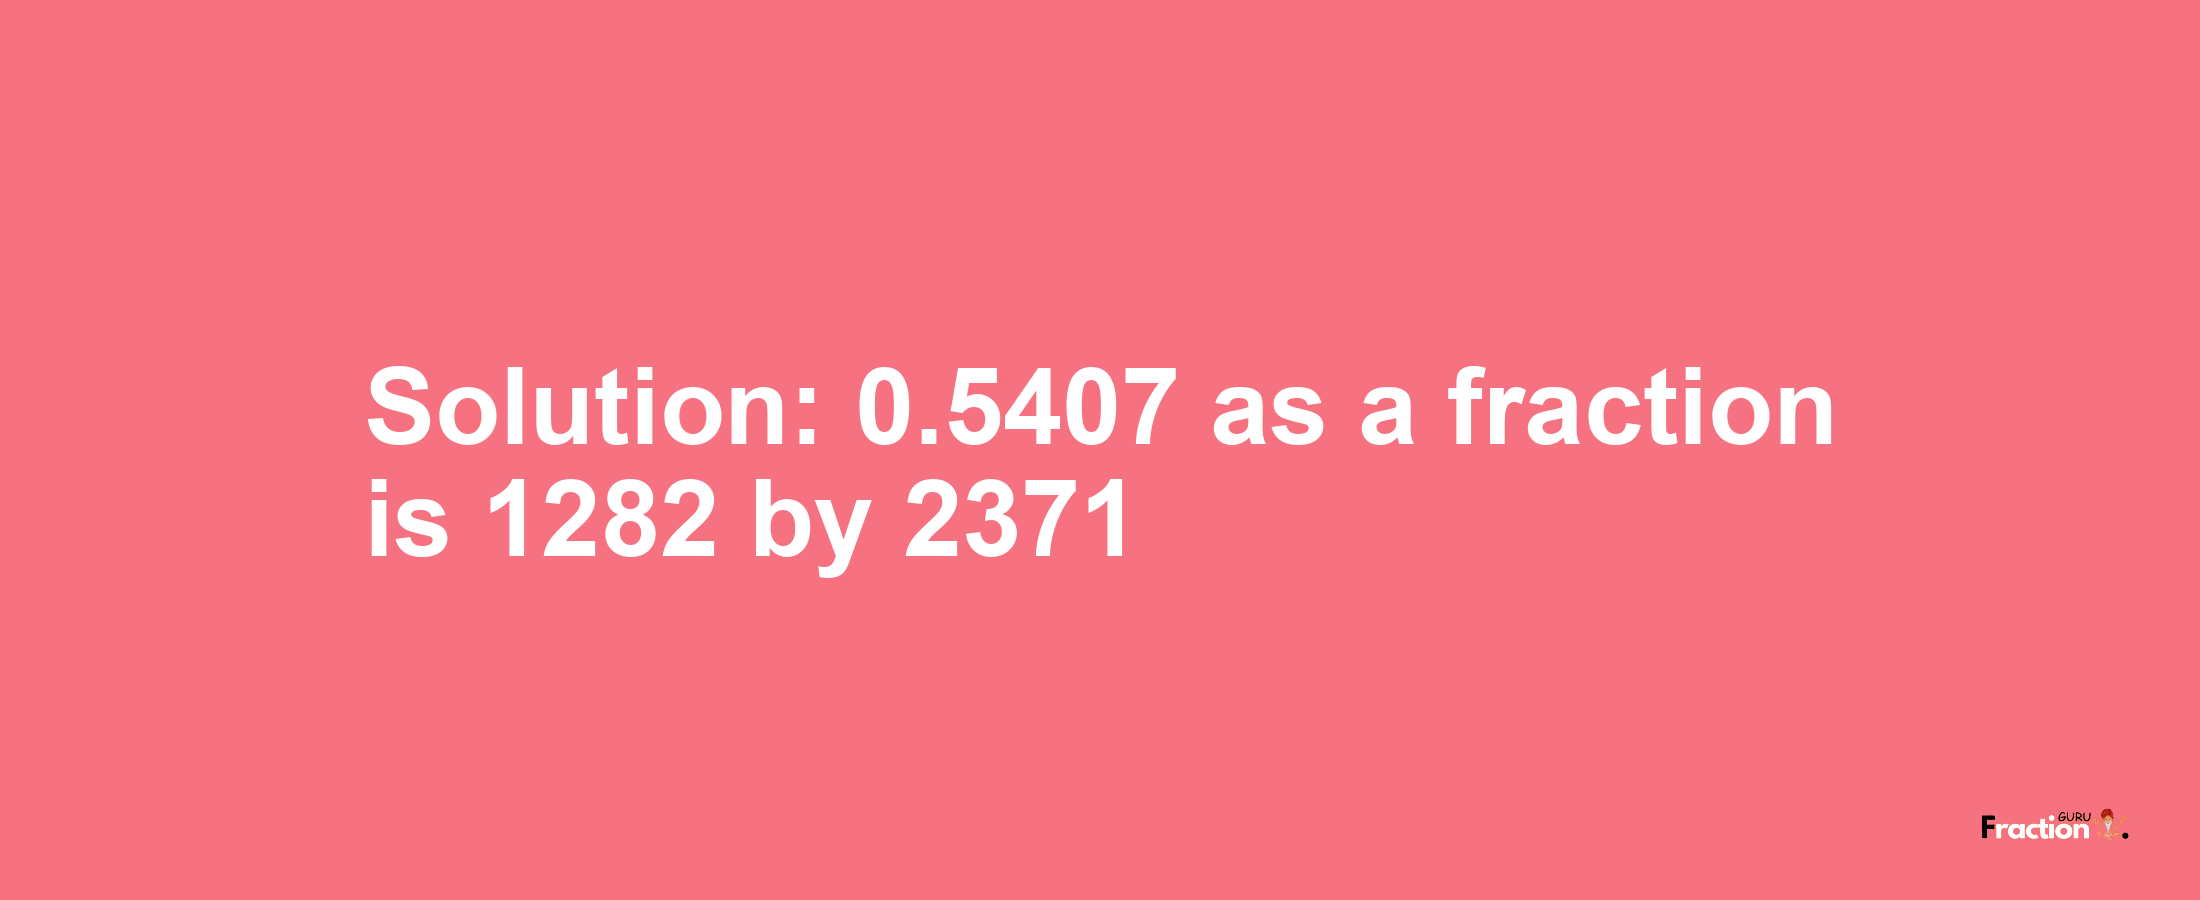 Solution:0.5407 as a fraction is 1282/2371